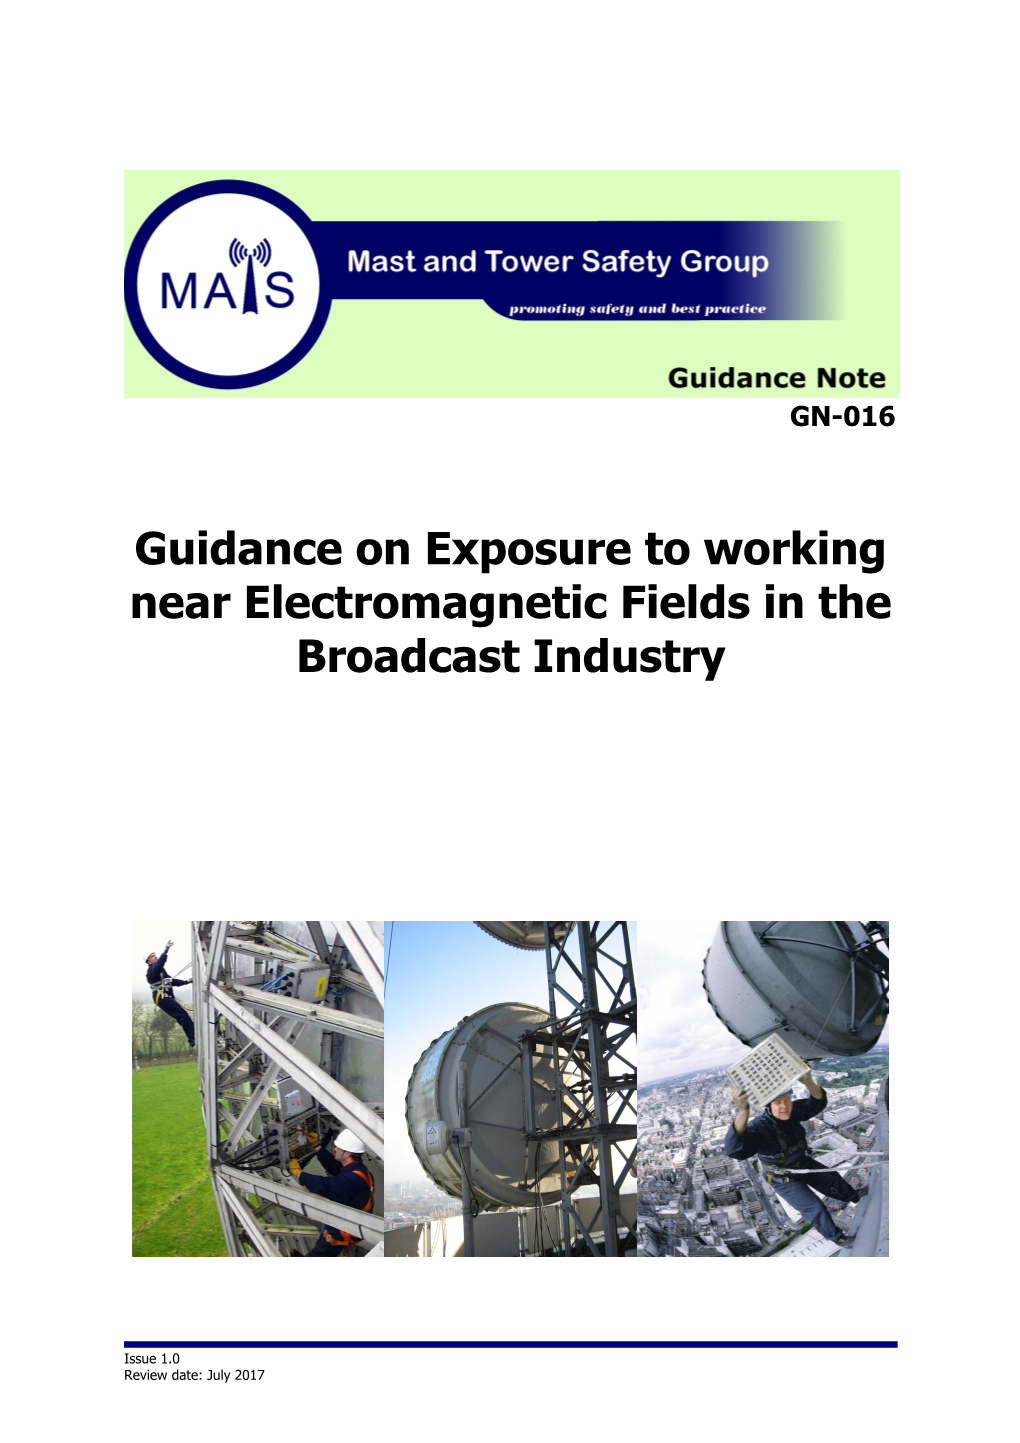 Guidance on Exposure to Working Near Electromagnetic Fields in the Broadcast Industry